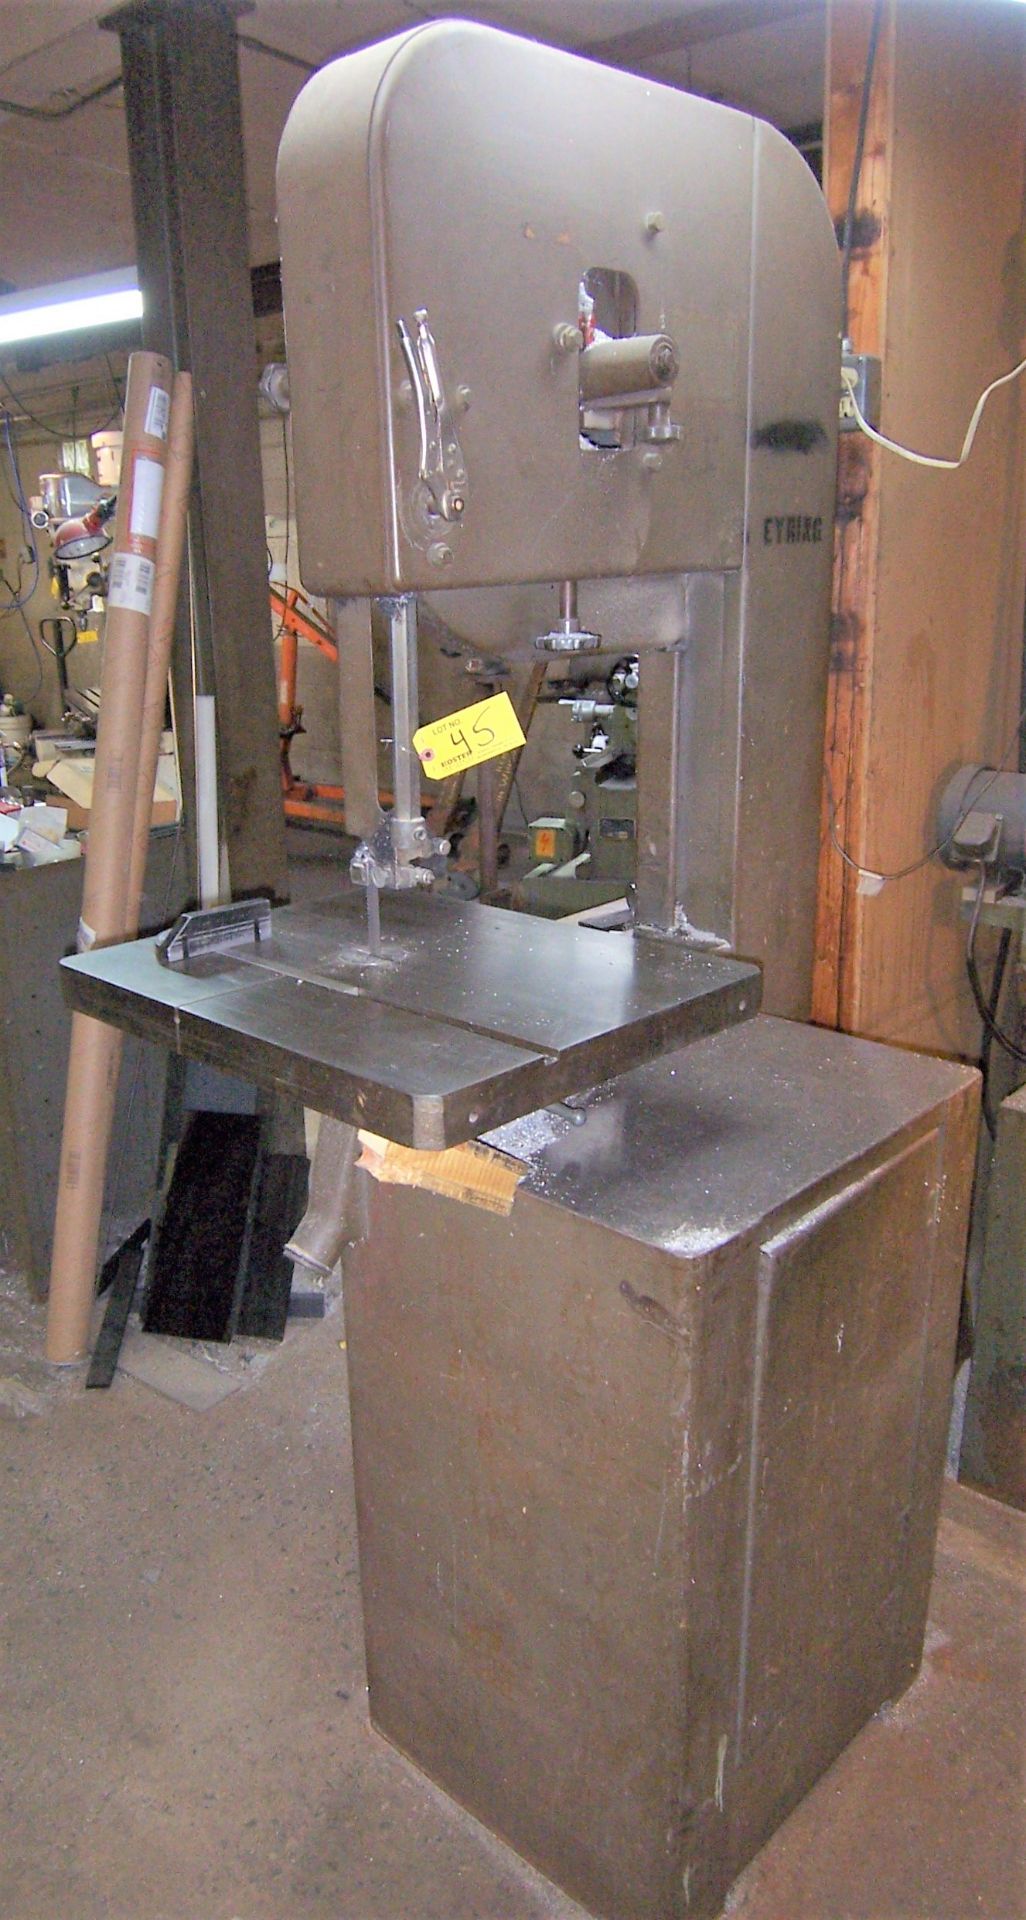 DELTA MILWAUKEE "CRESCENT" 20" VERTICAL BAND SAW WITH 20" X 24" TILTING TABLE